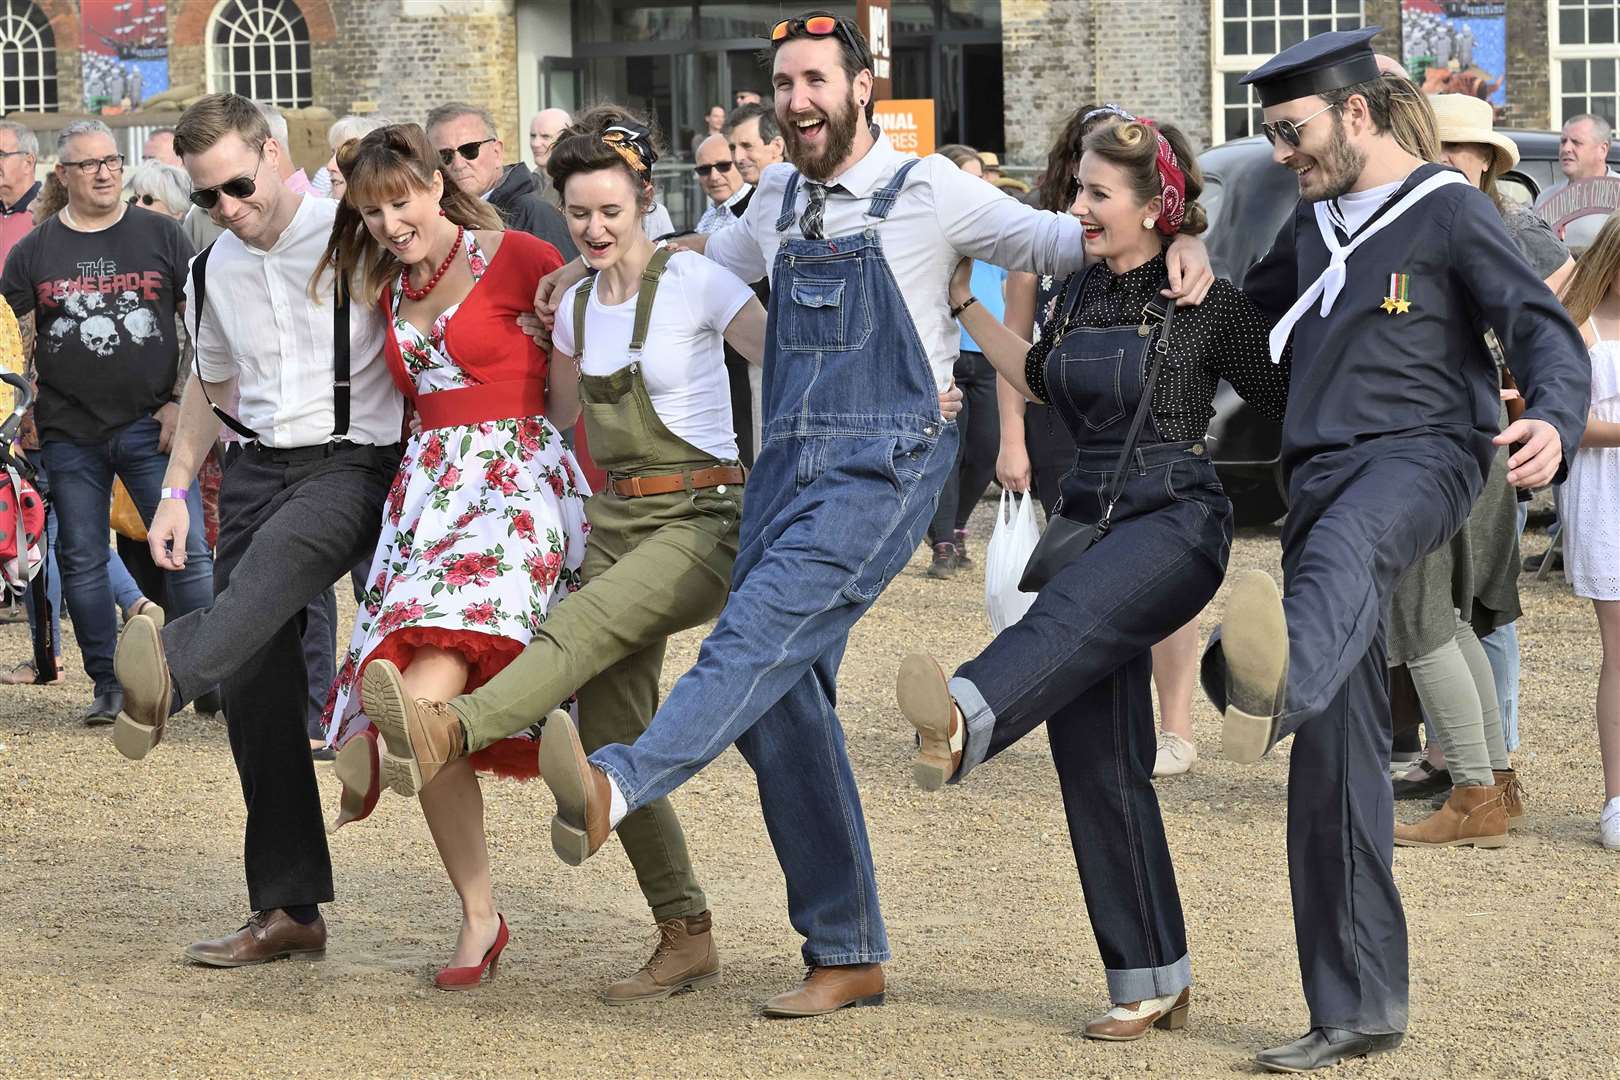 Salute to the 40s at Chatham Historic Dockyard will feature a number of liver performers. Photo by Ray Fothergill (15476339)